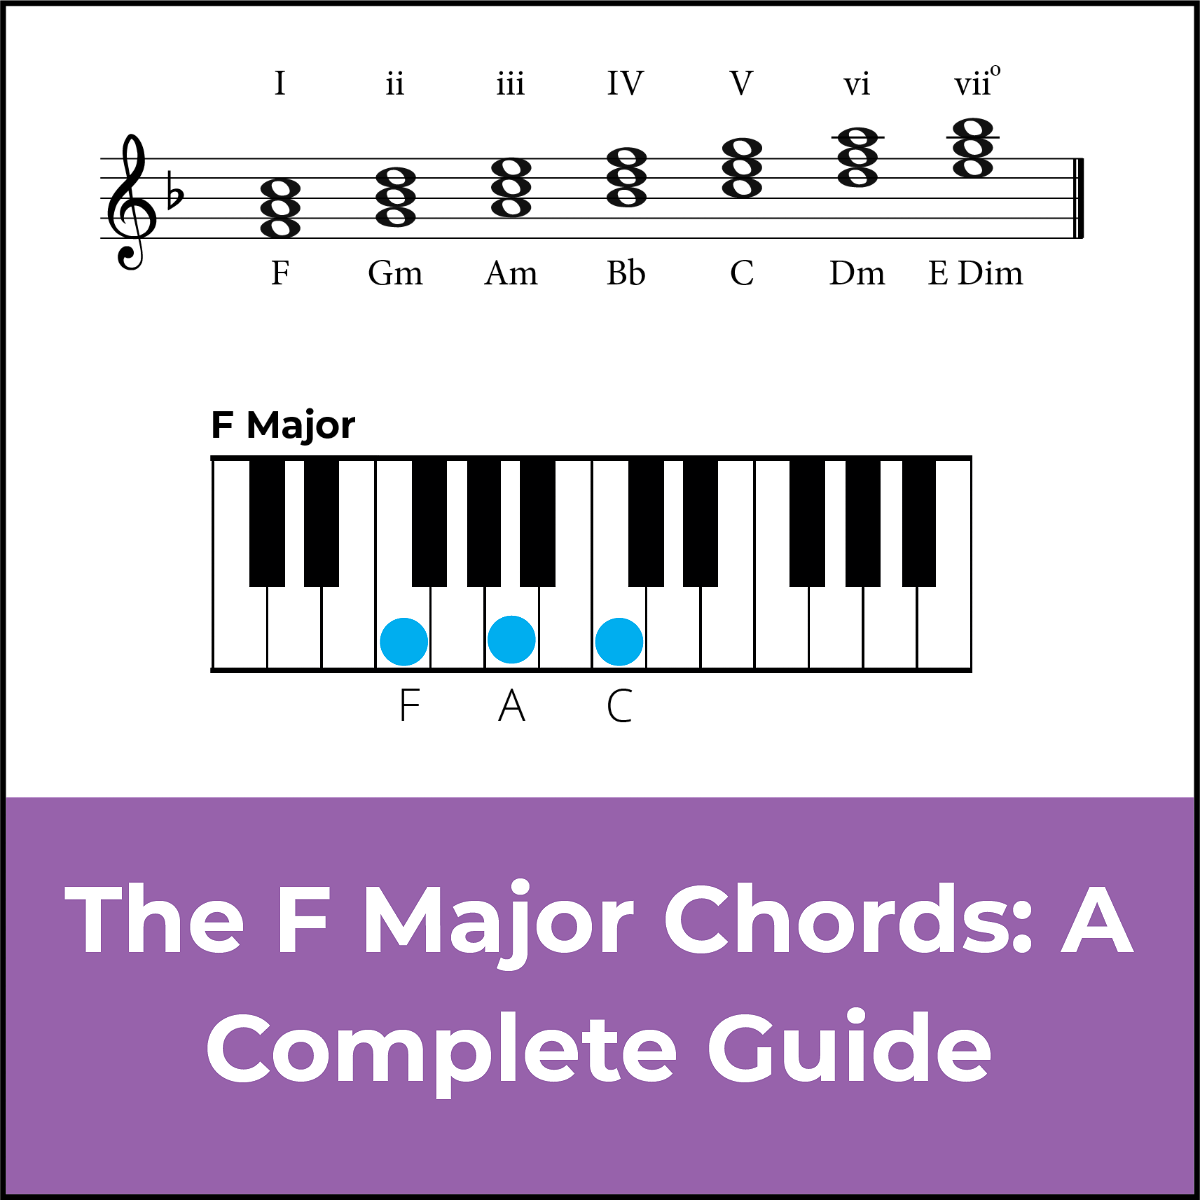 Chords in F Major: A Music theory Guide